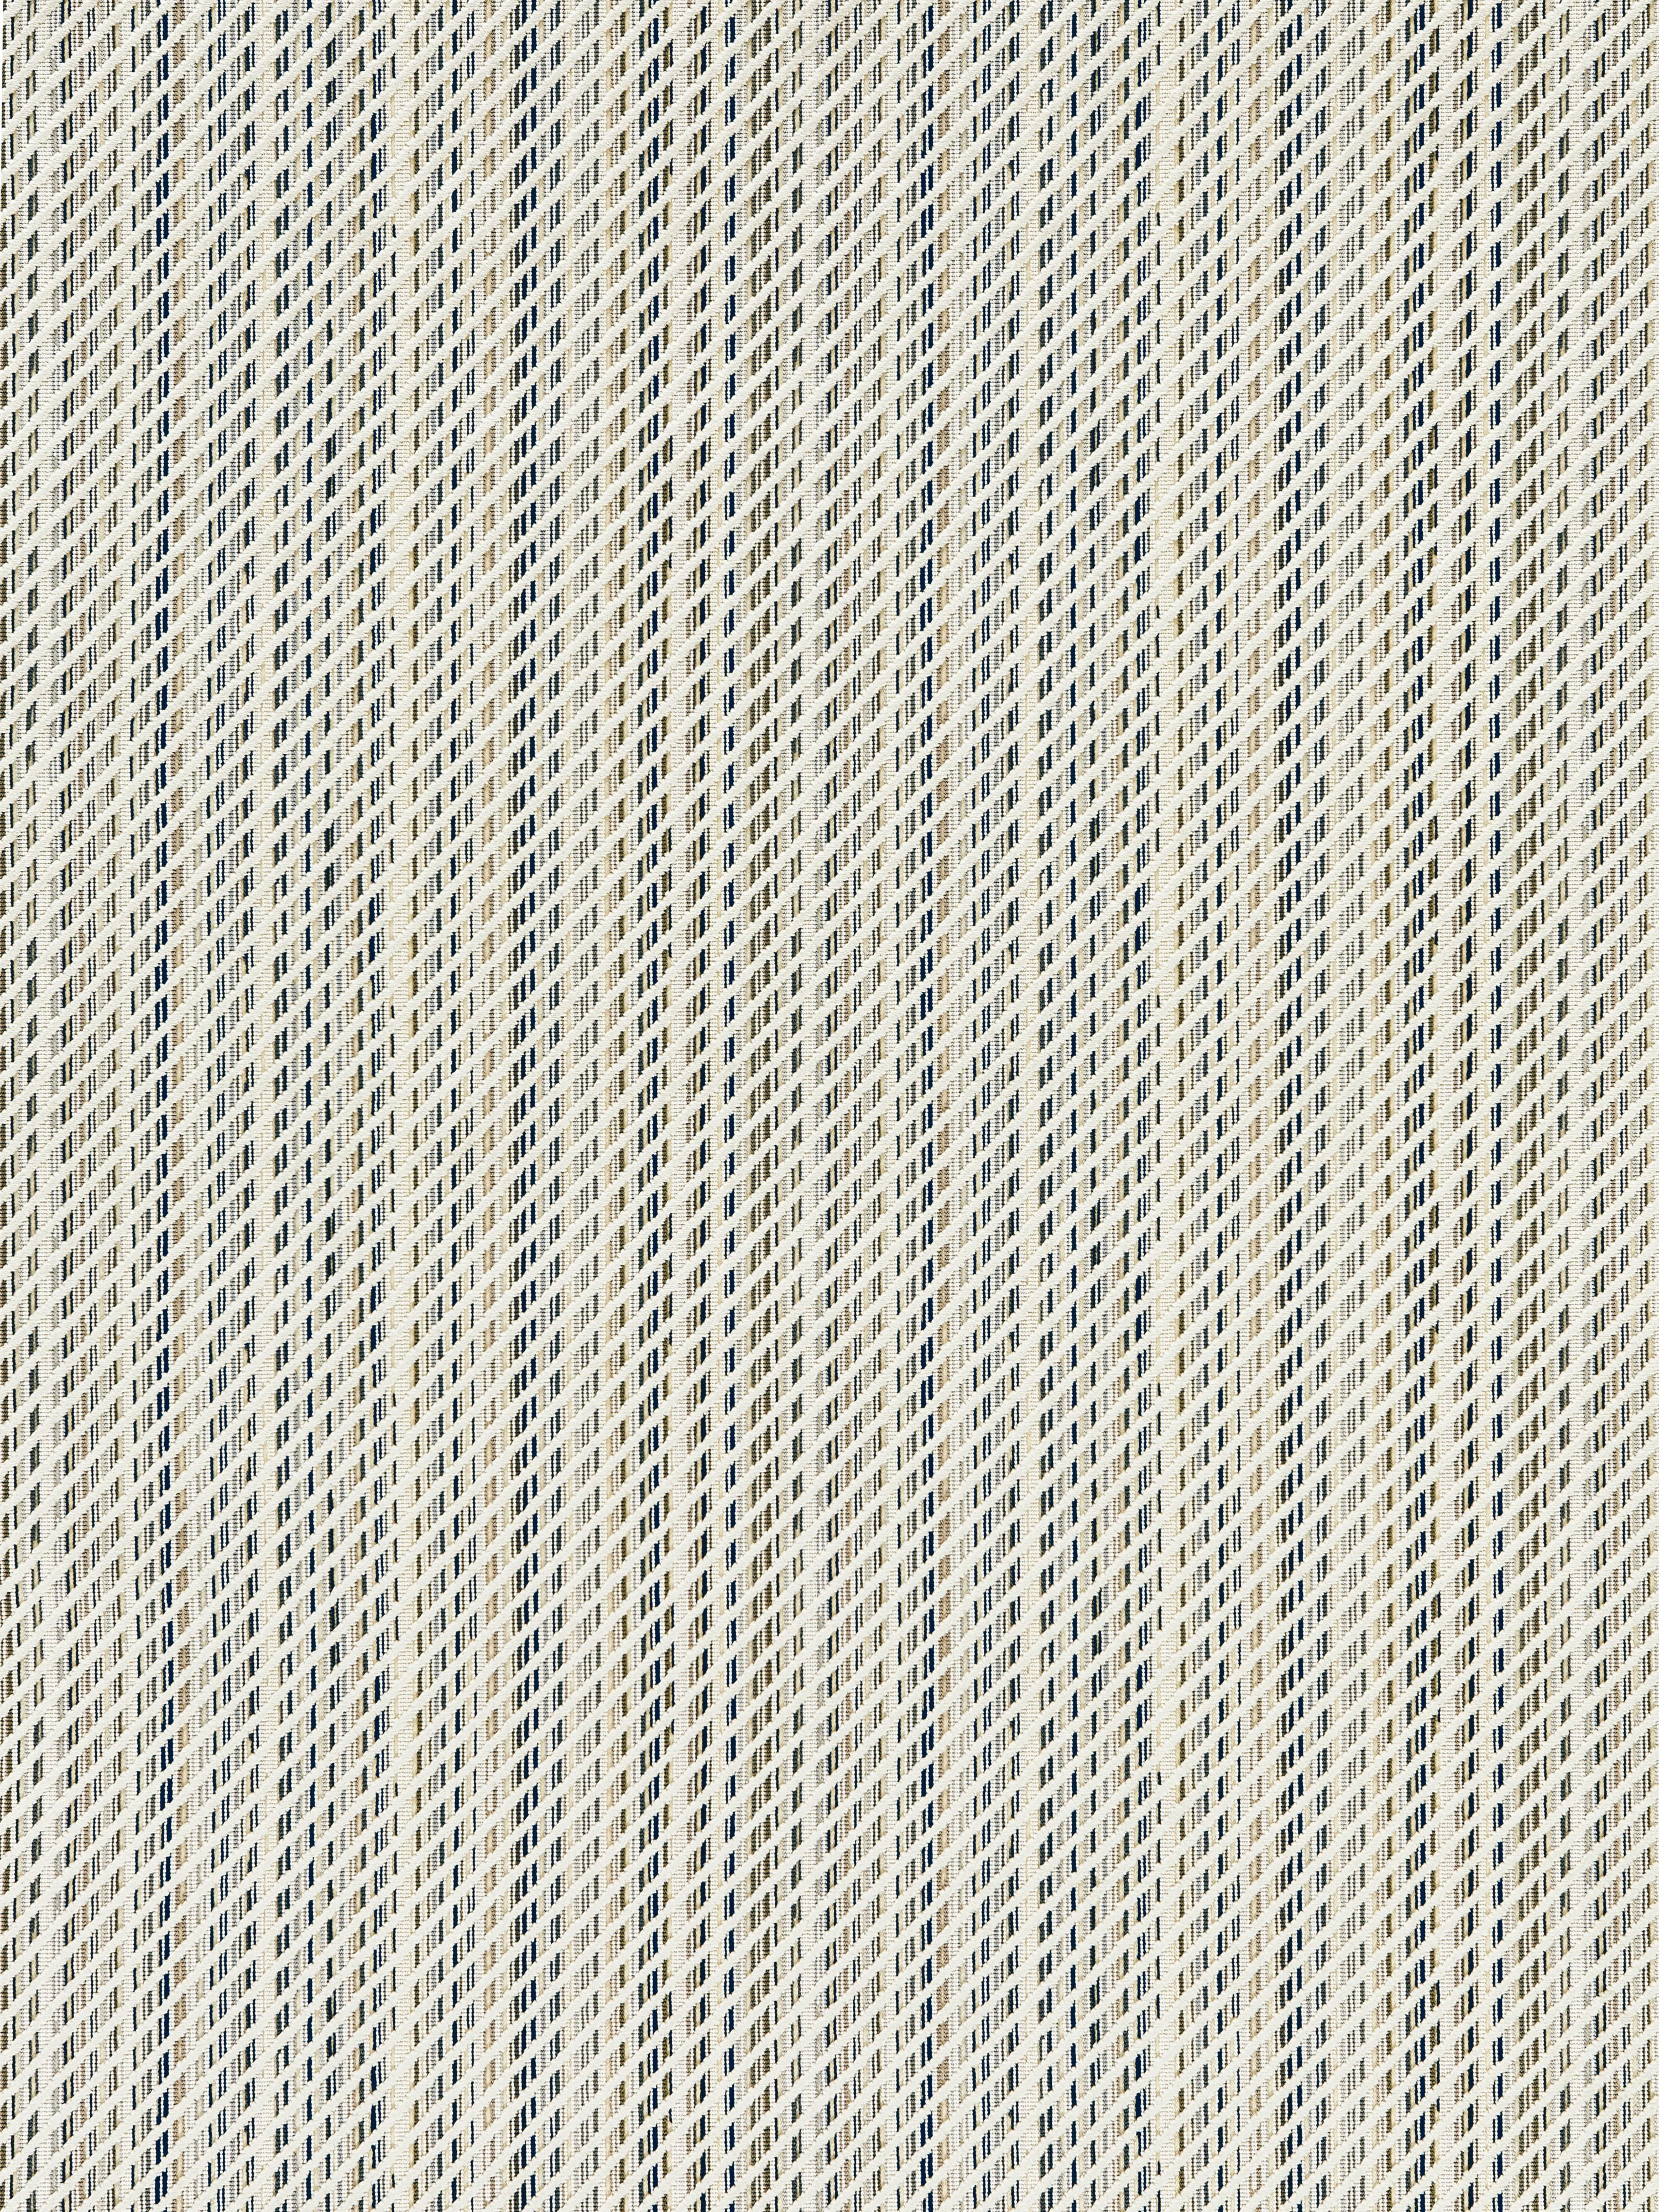 Prisma Velvet fabric in boardwalk color - pattern number SC 000327238 - by Scalamandre in the Scalamandre Fabrics Book 1 collection